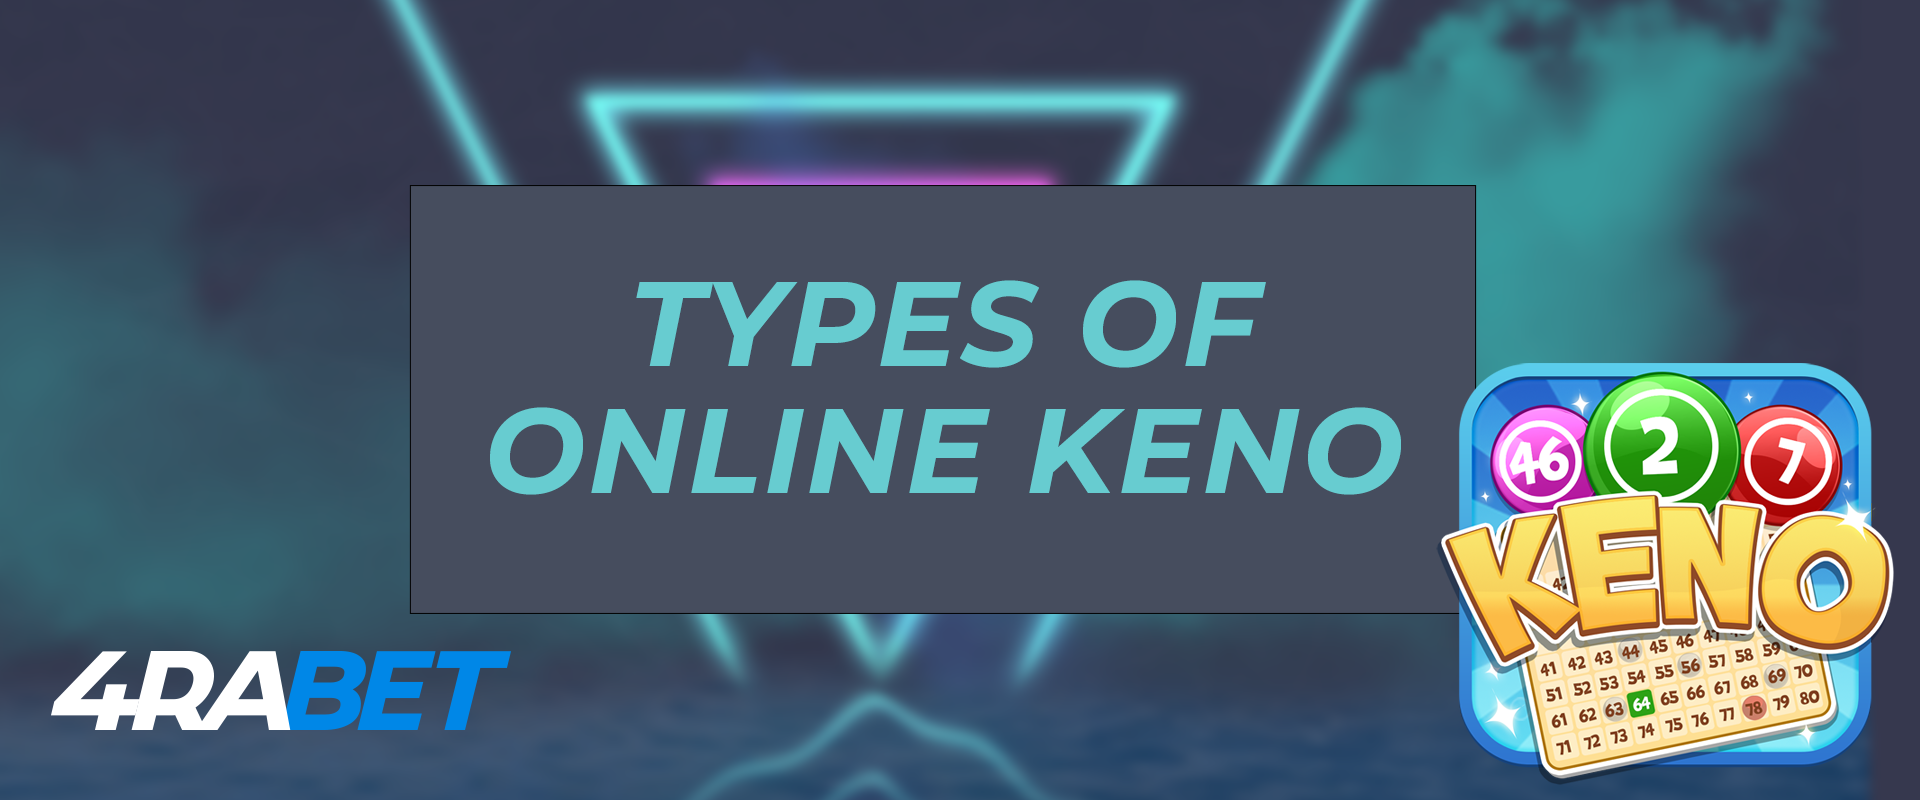 Types of online keno on the 4rabet.